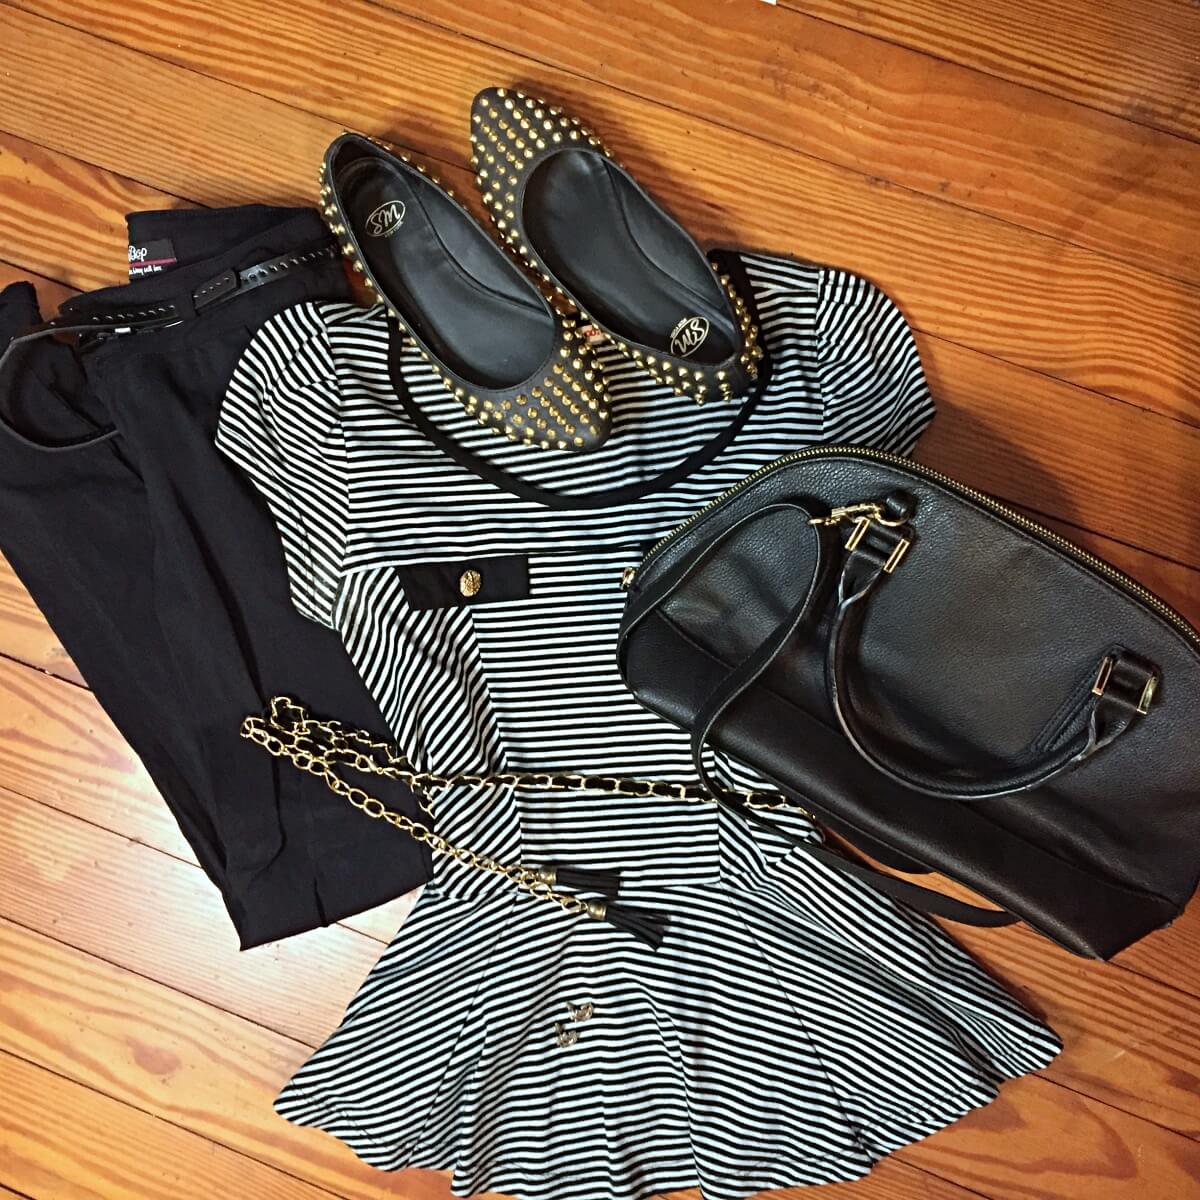 peplum black and white stripe sailor shirt outfit